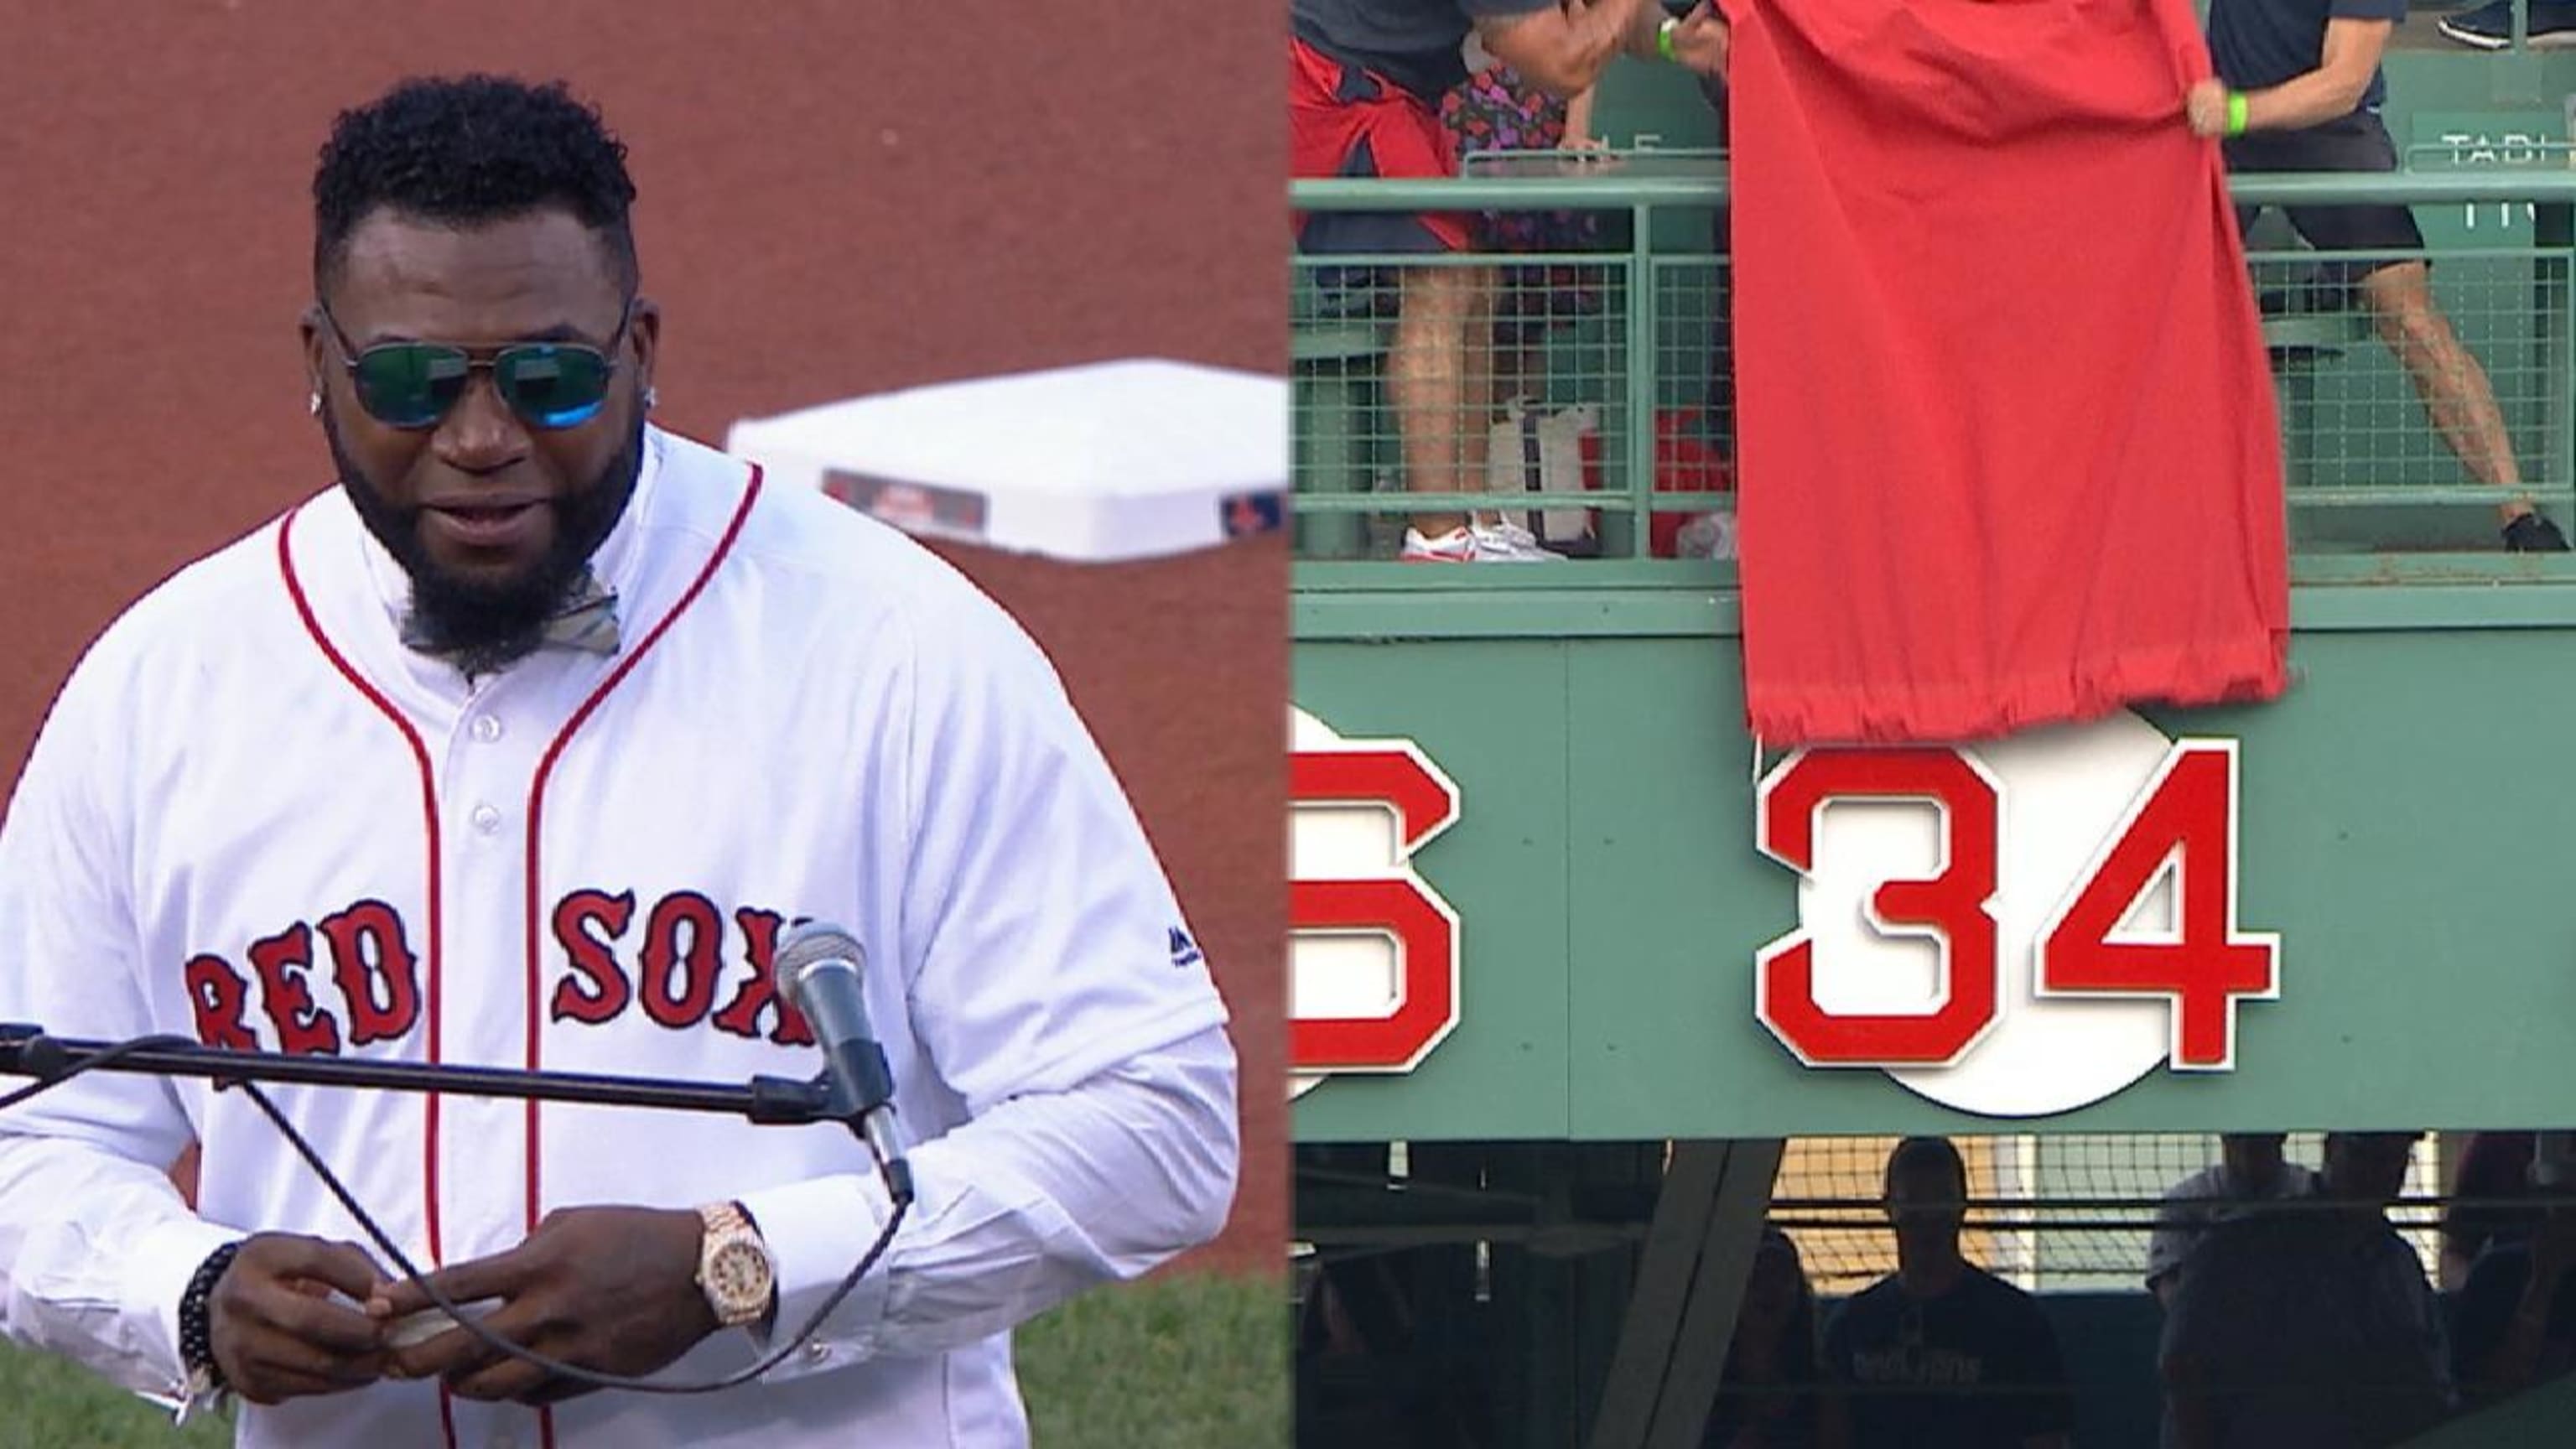 SEE IT: David Ortiz says 'hopefully' he gets a jersey retirement